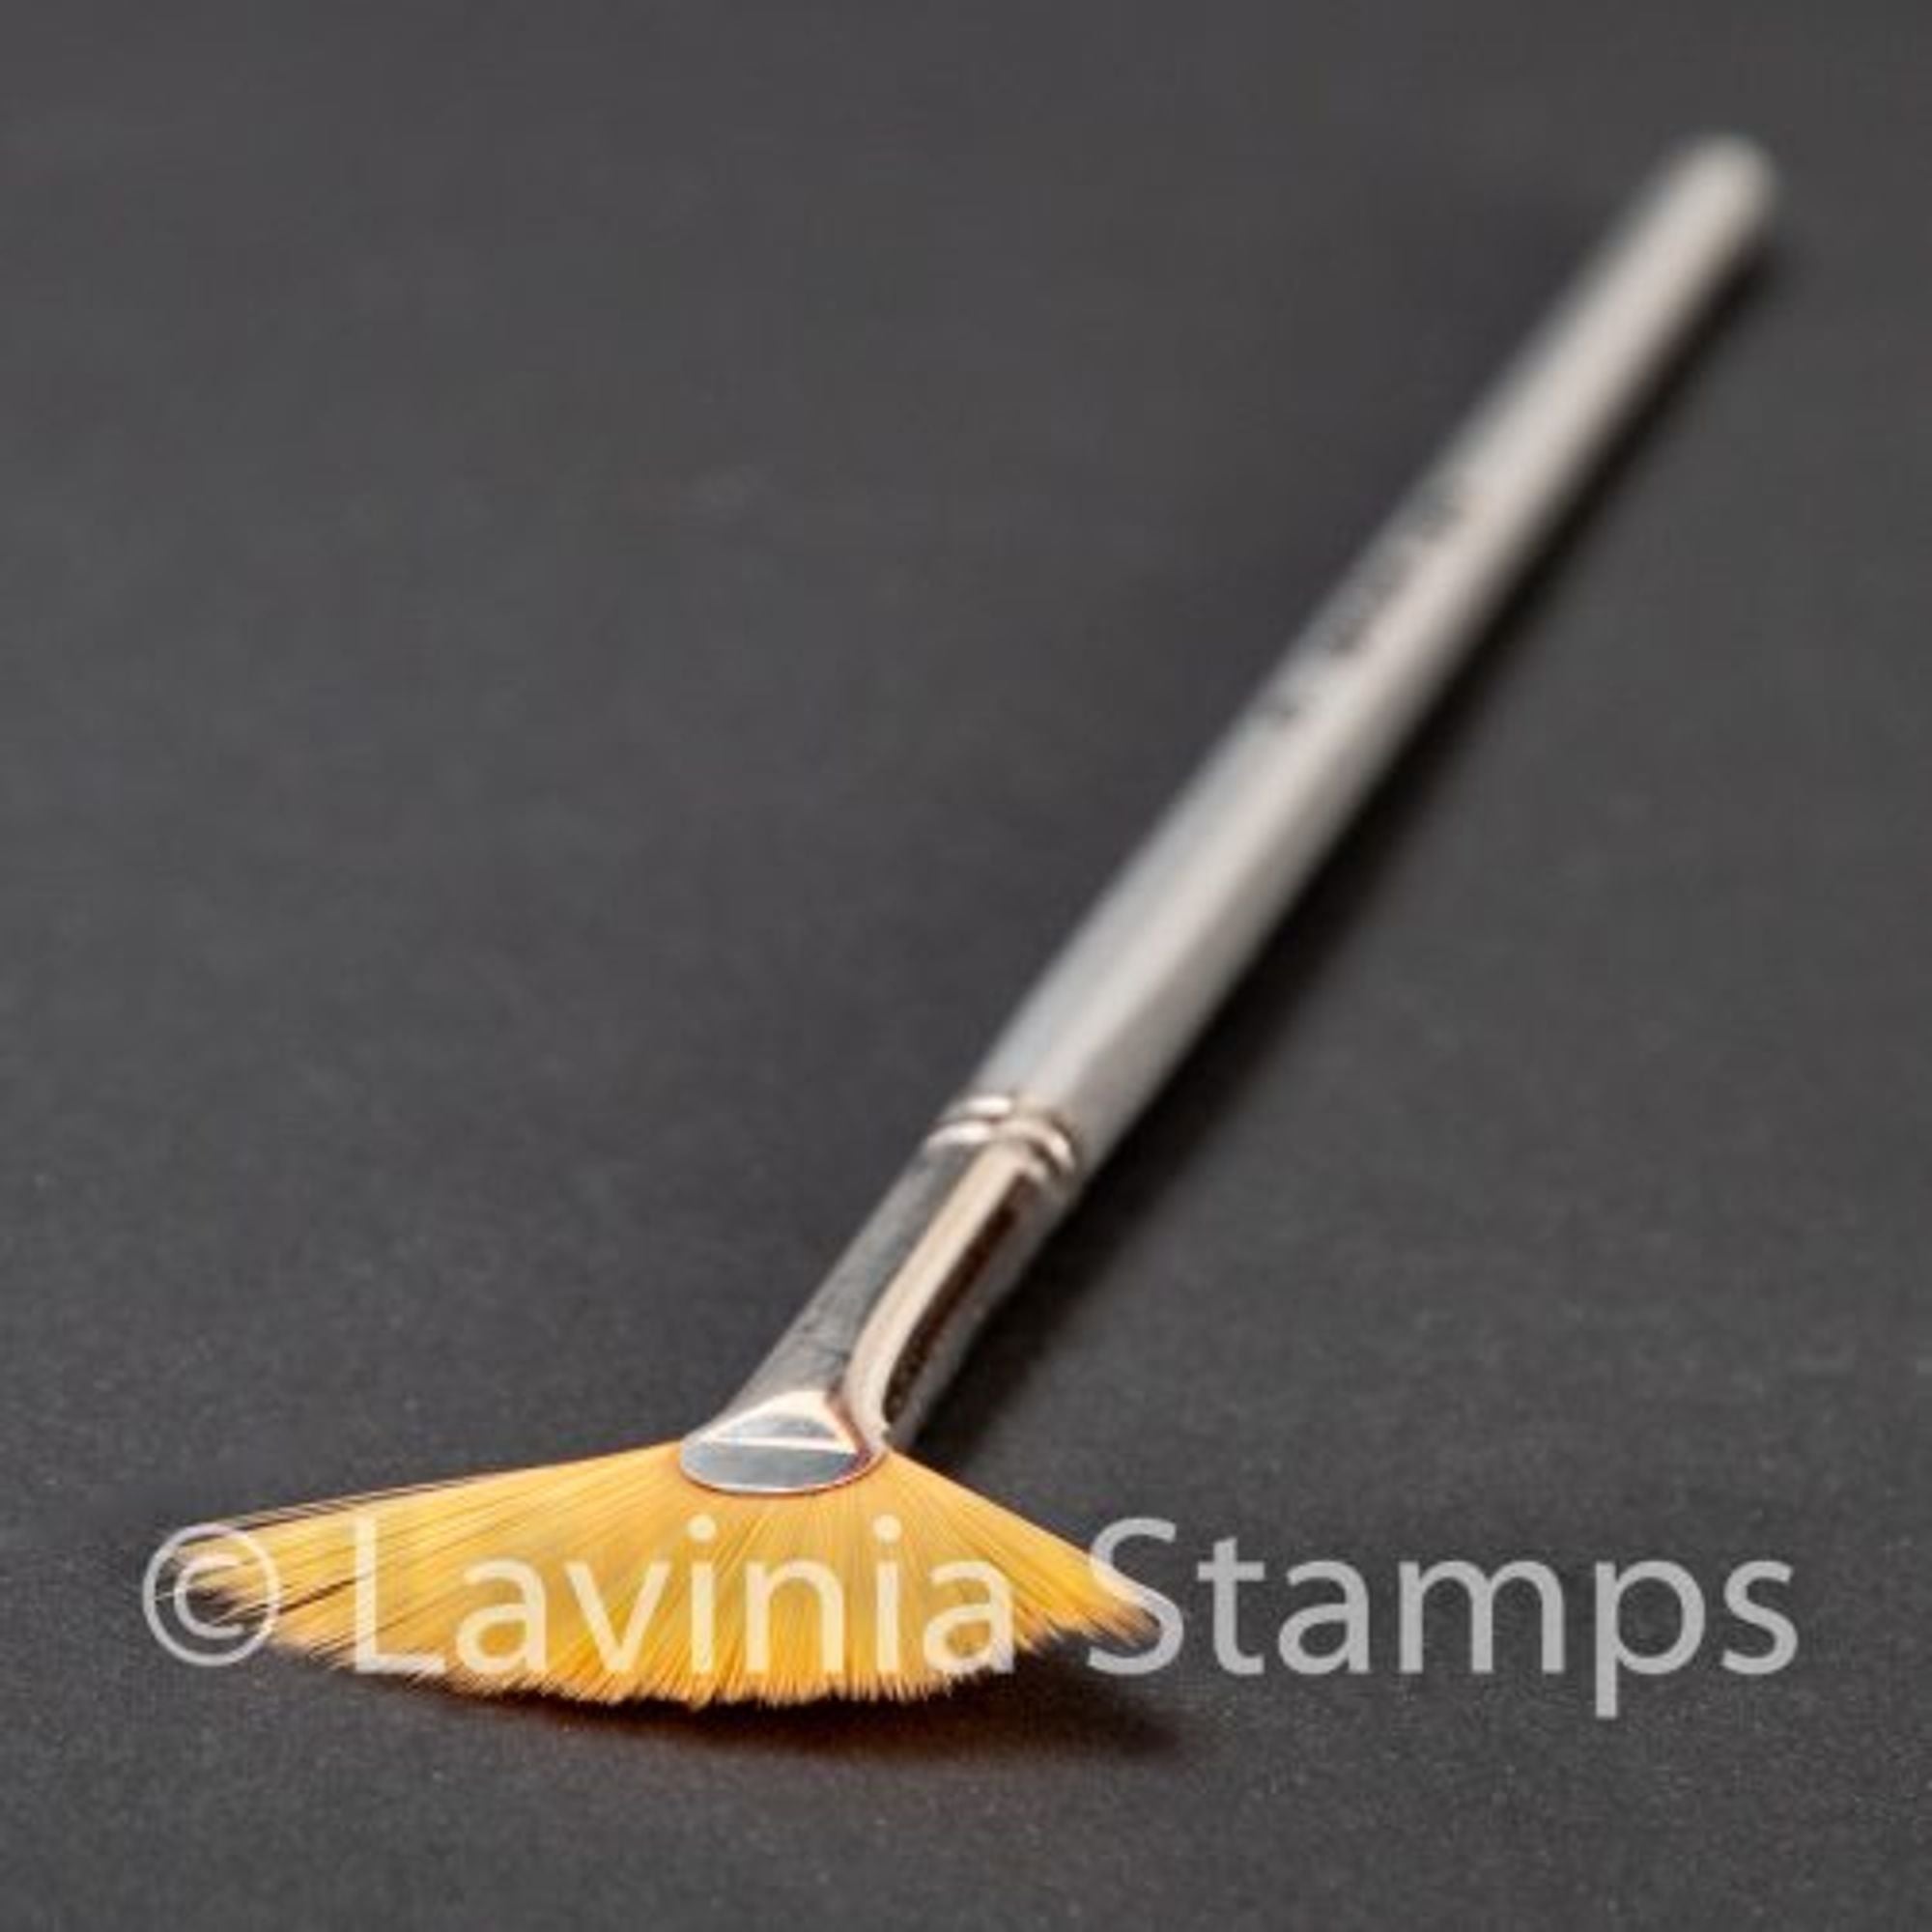 Lavinia Stamps - Synthetic Fan Brush